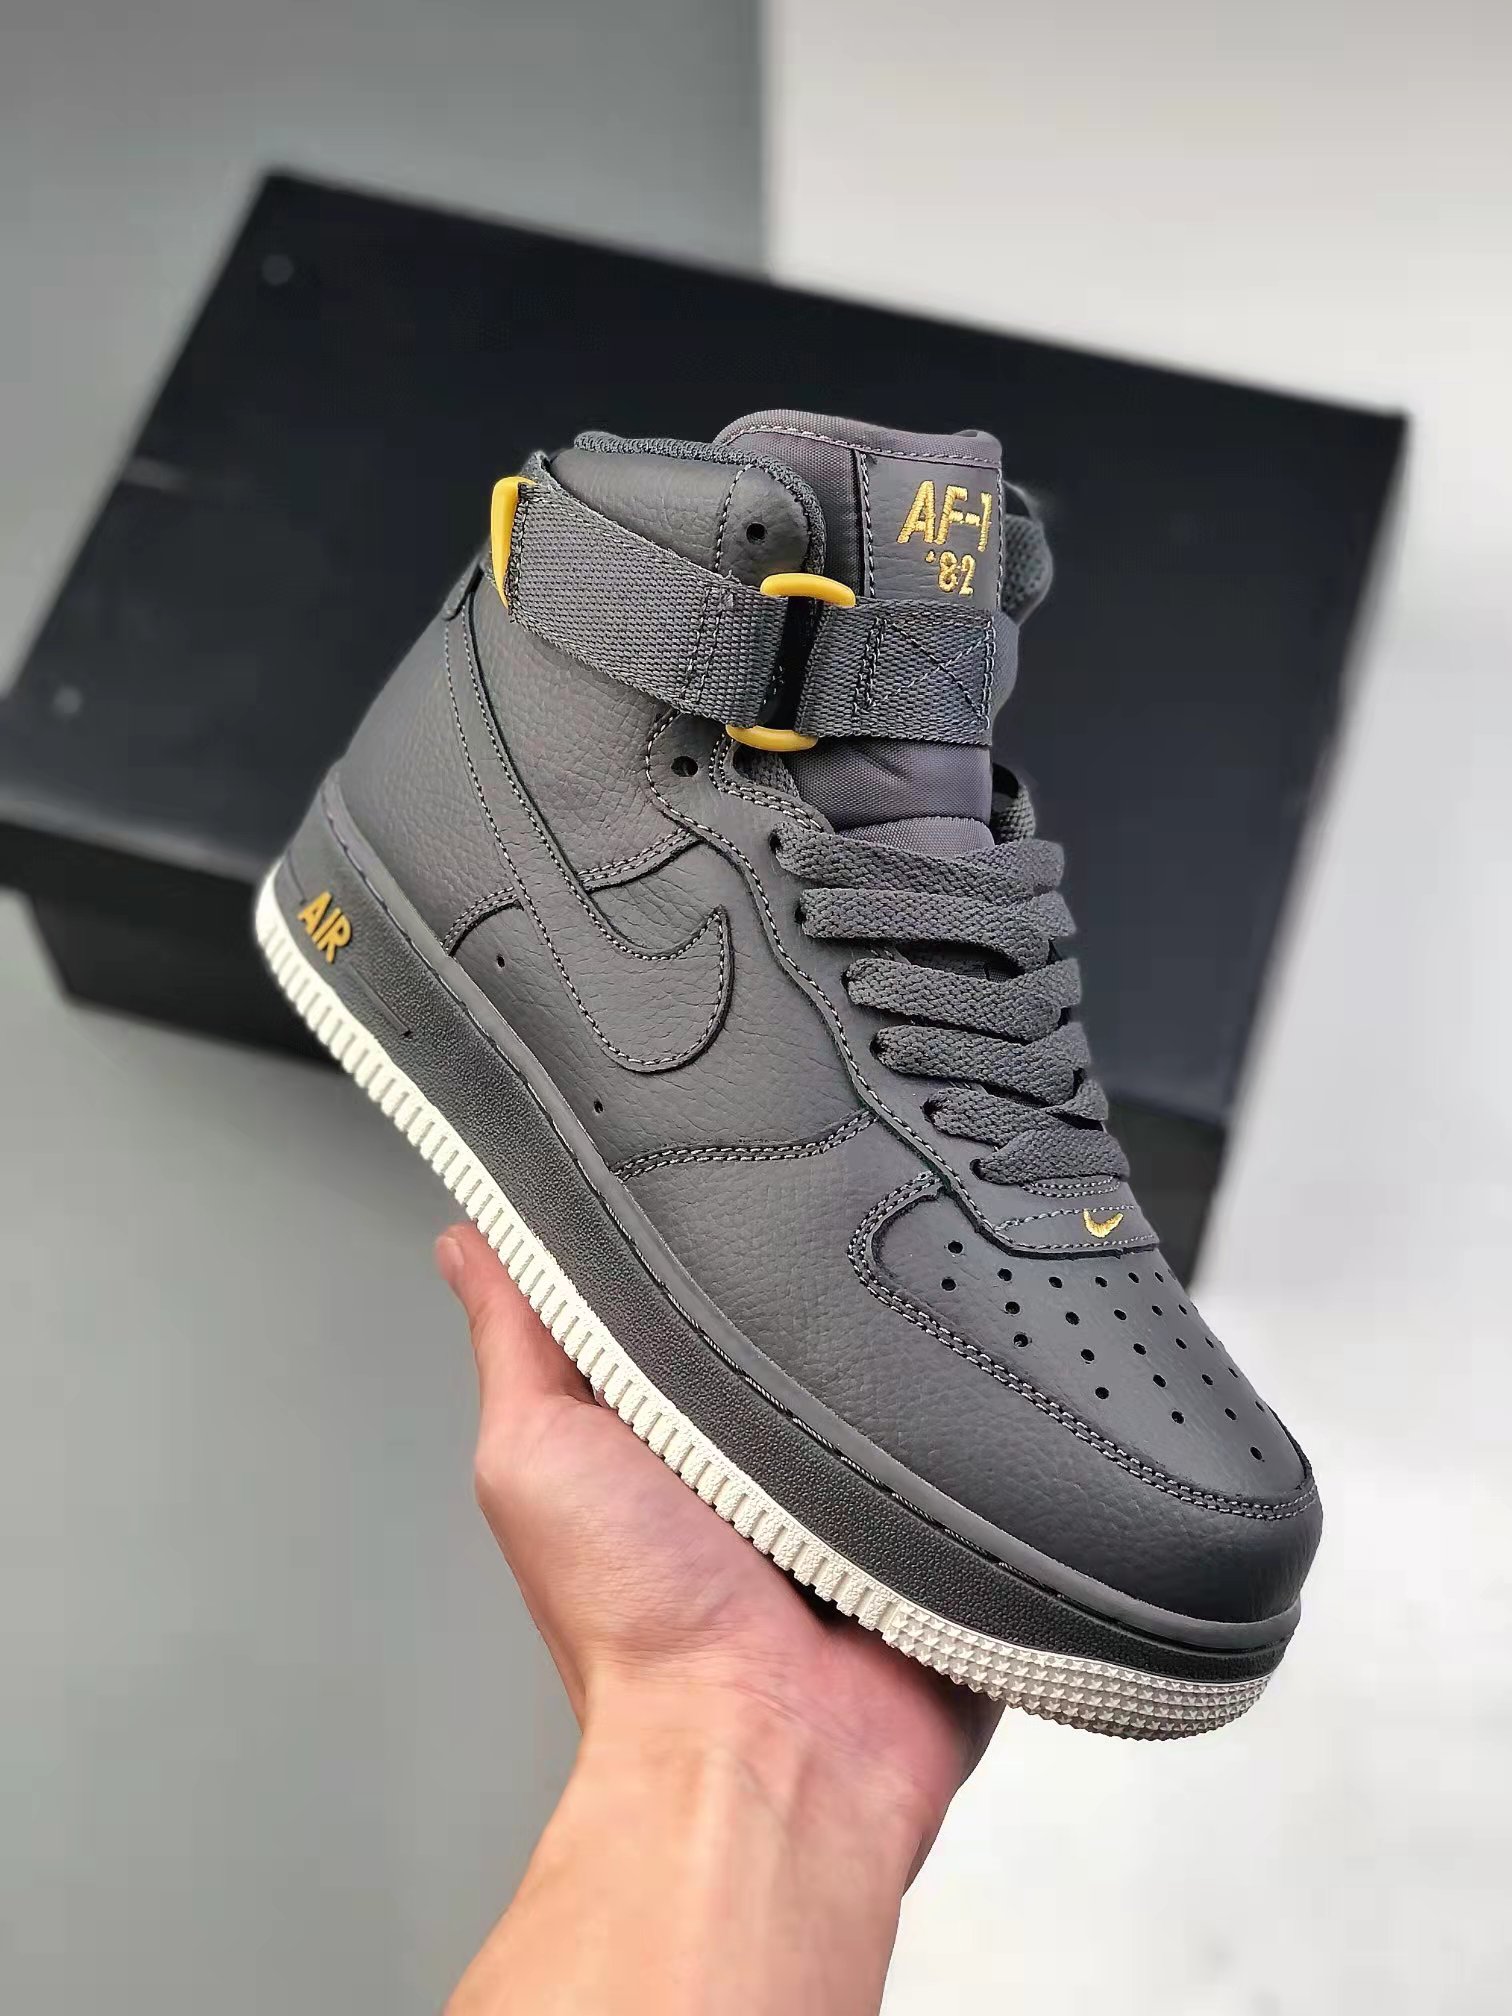 Nike Air Force 1 High '07 'Cool Grey' 315121-049 - Sleek and Stylish Footwear for Every Occasion